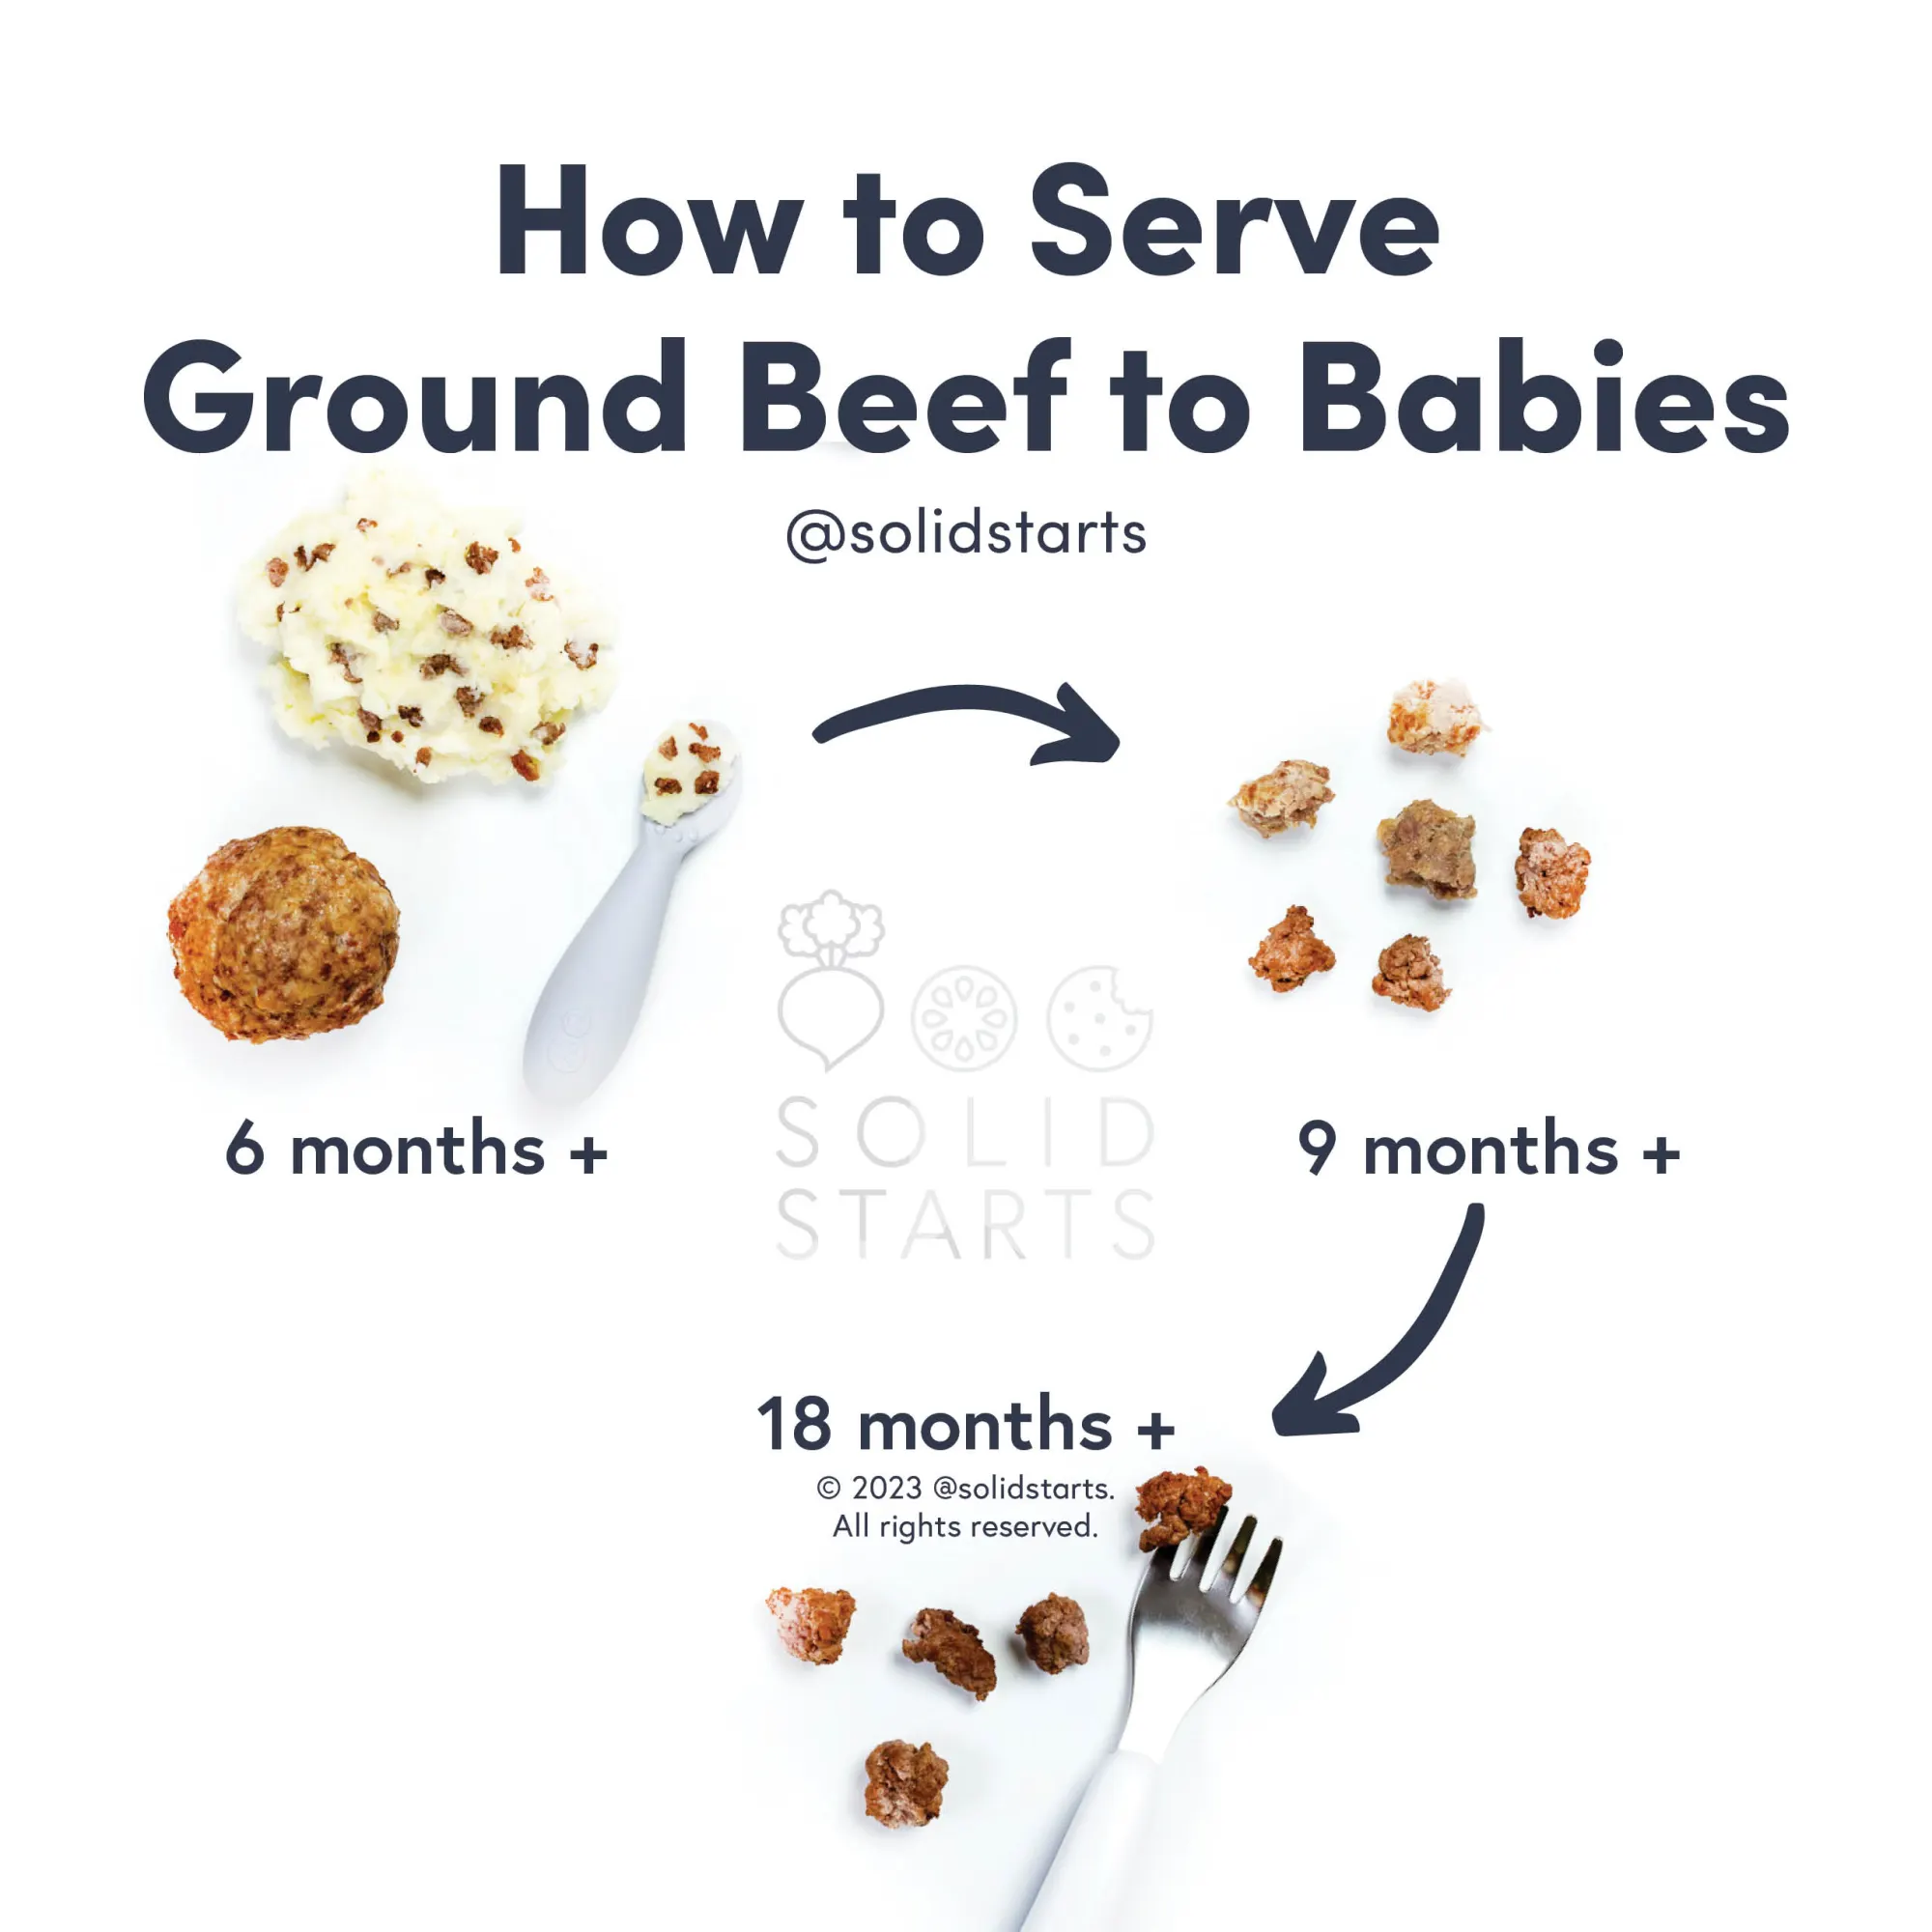 a Solid Starts infographic with the header How to Serve Ground Beef to Babies: a large meatball or mixed into scoopable food for 6 mos+, bite-sized crumbles for 9 mos+, bite-sized crumbles on a fork for 18 mos+